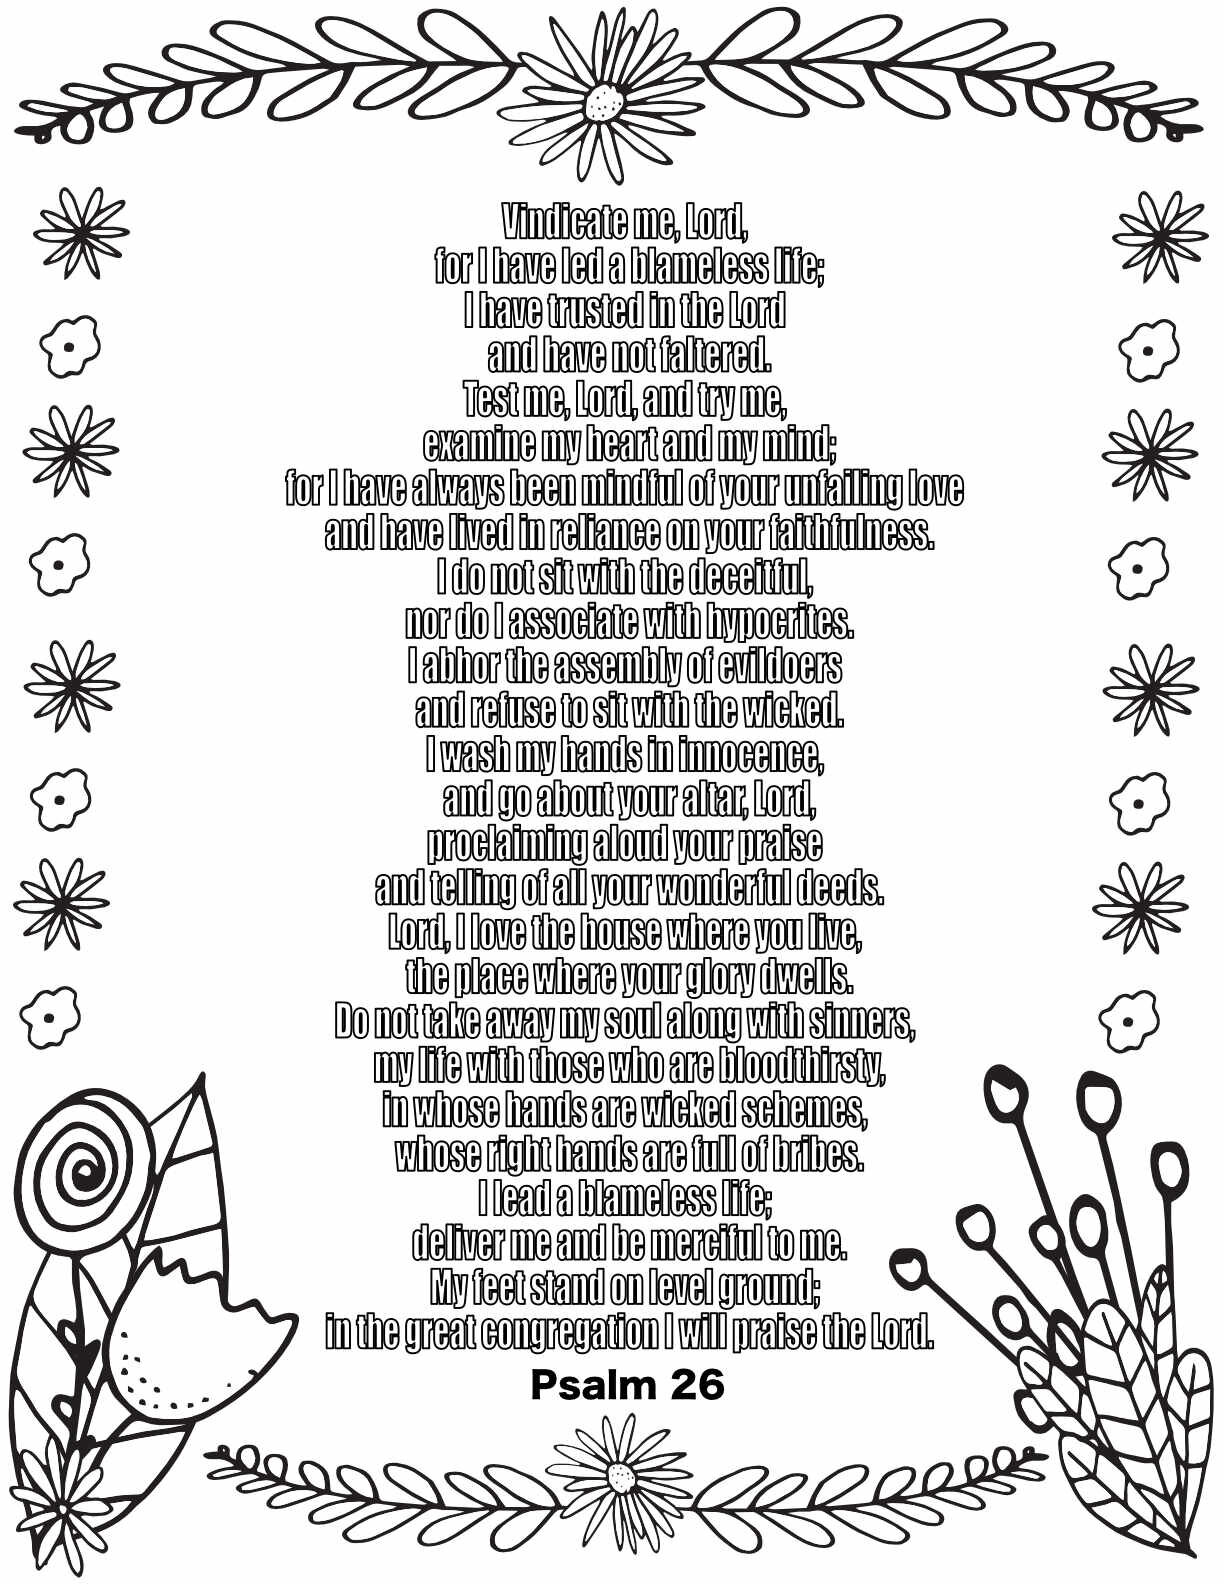 10 Free Printable Psalm Coloring Pages - Download and Color Adult Scripture - Psalm 26CLICK HERE TO DOWNLOAD THIS PAGE FREE